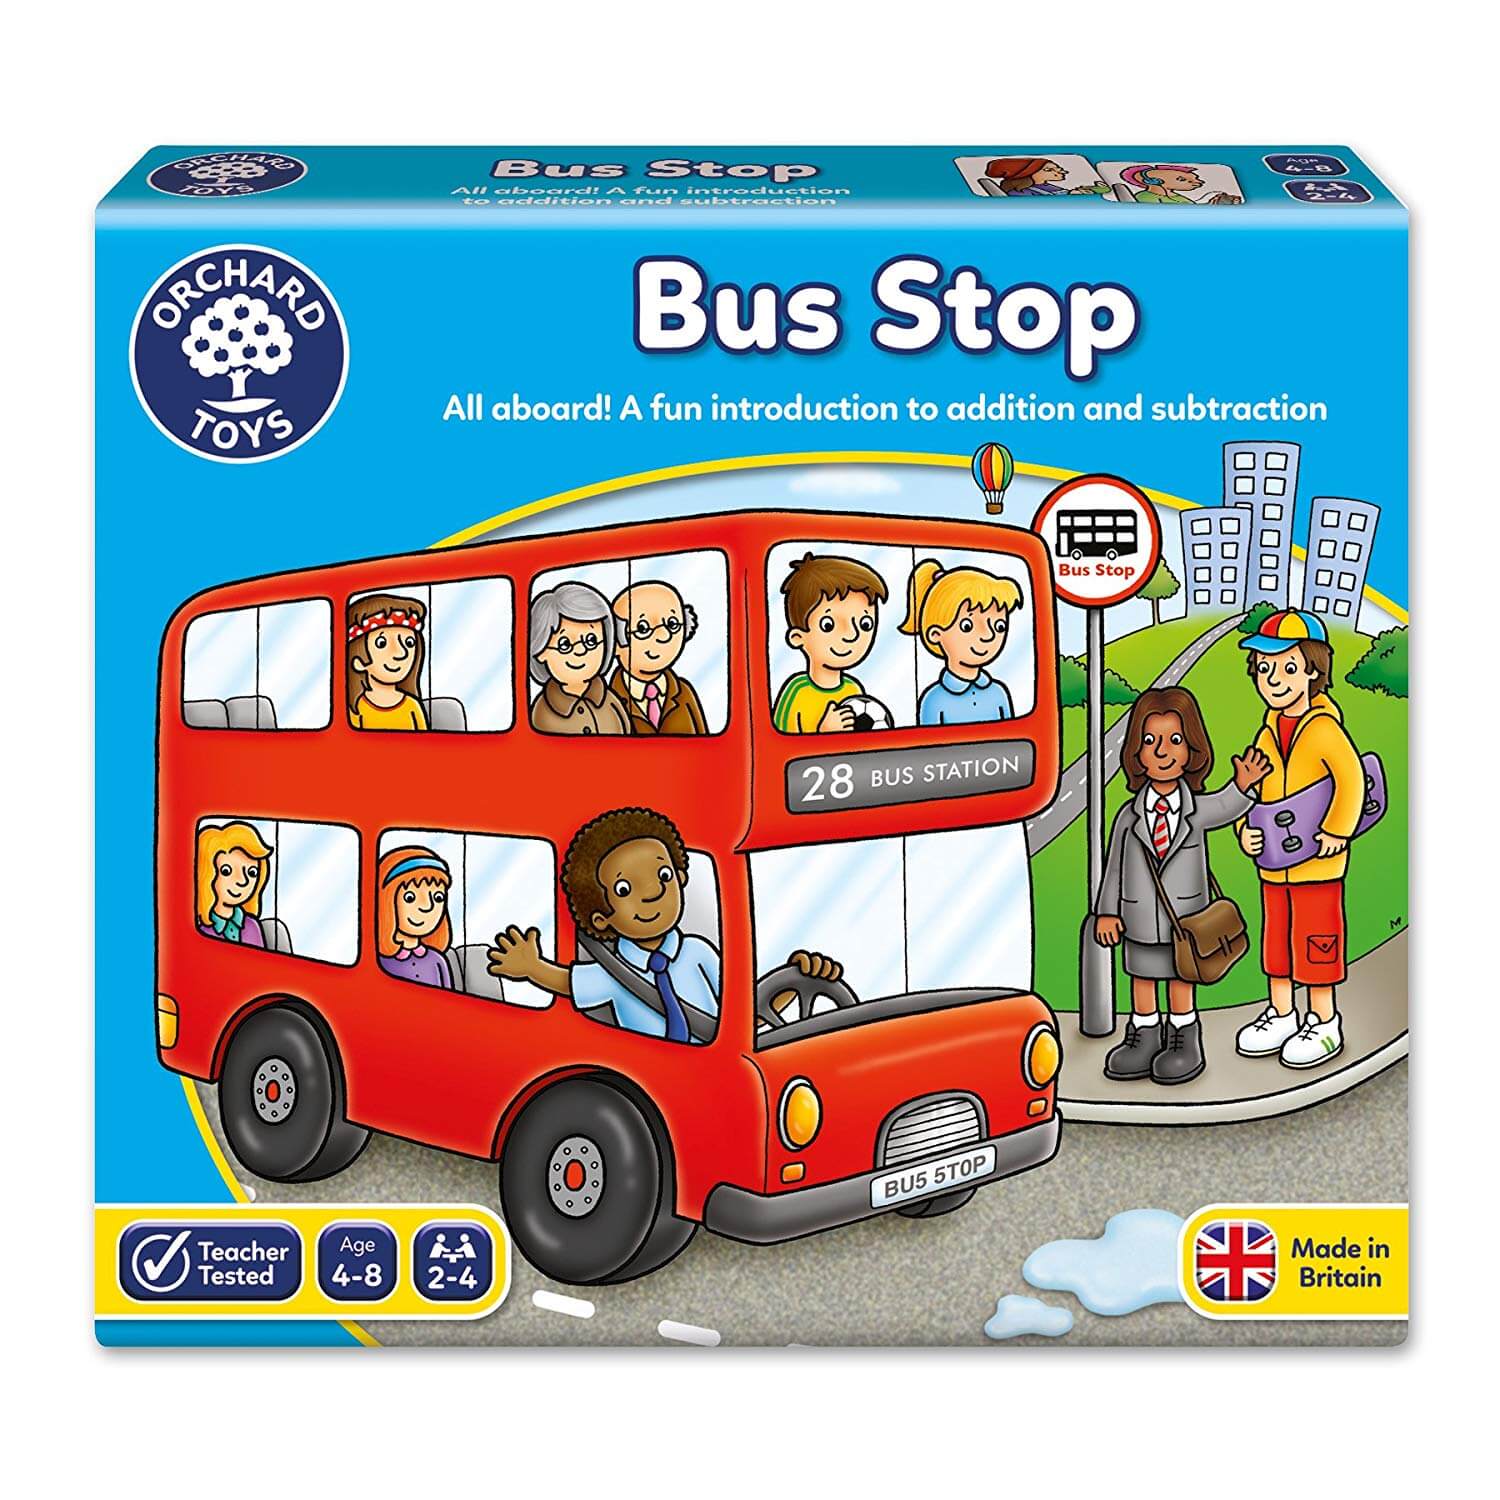 Bus　Ireland　Toys　Stop　Orchard　Cogs　Toys　Games